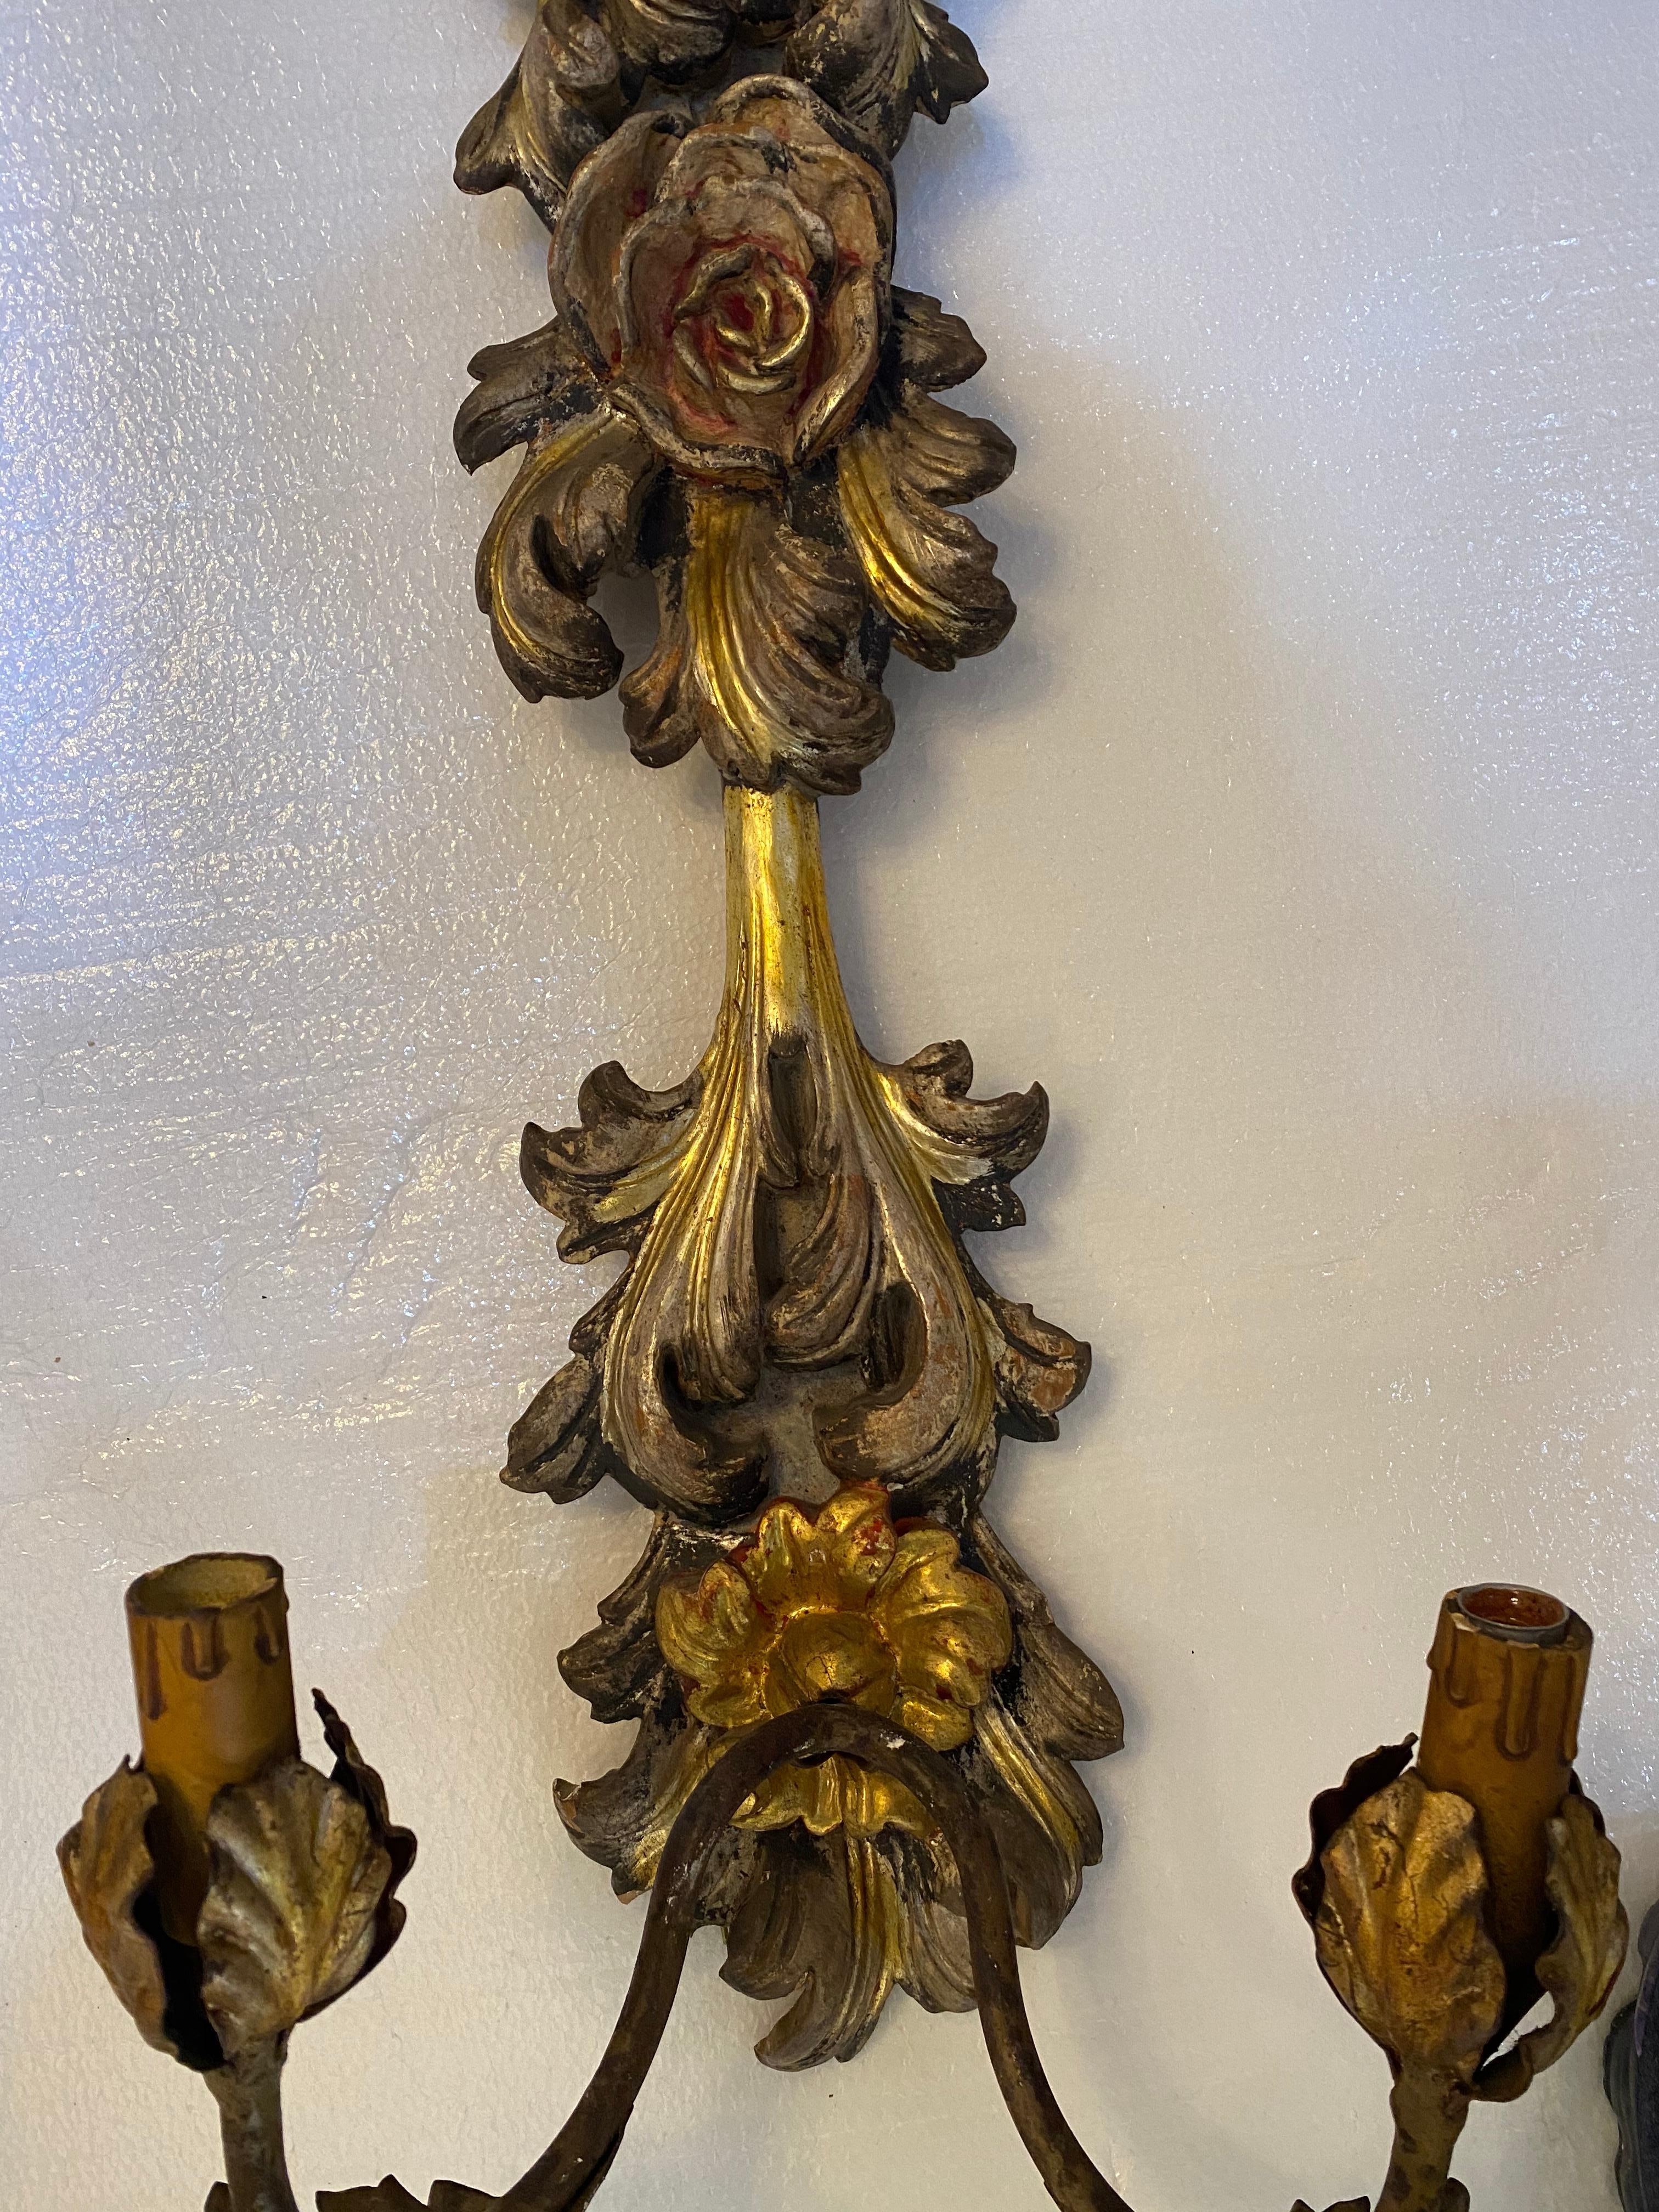 Two lights ea. Italian two-light wood sconces, early 20th c., parcel gilt and polychrome painted wall mounts, having relief carved foliate and rose motif, supporting two patinated metal arms ending in petal bobeche and faux candles.